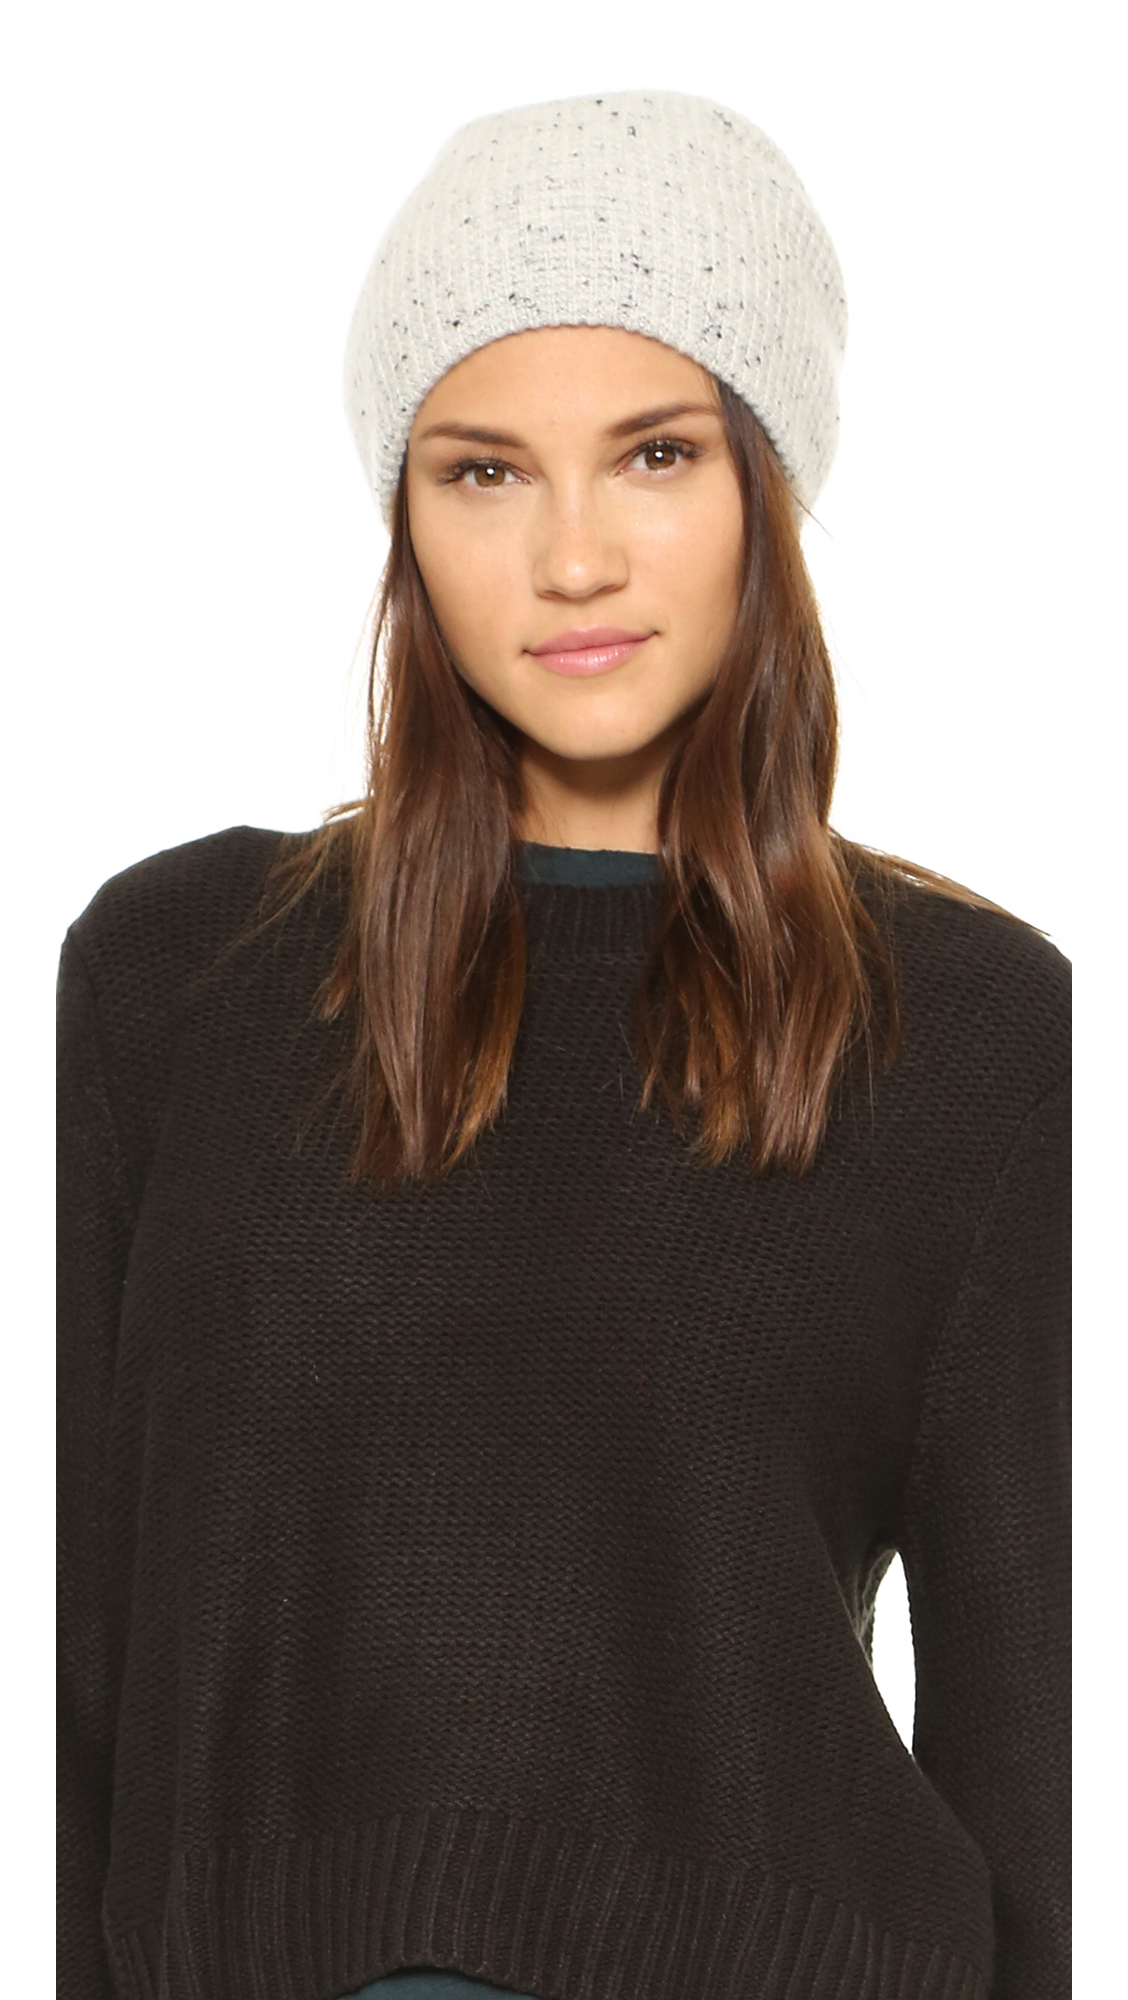 Lyst - Madewell Cashmere Waffle Knit Hat in Natural